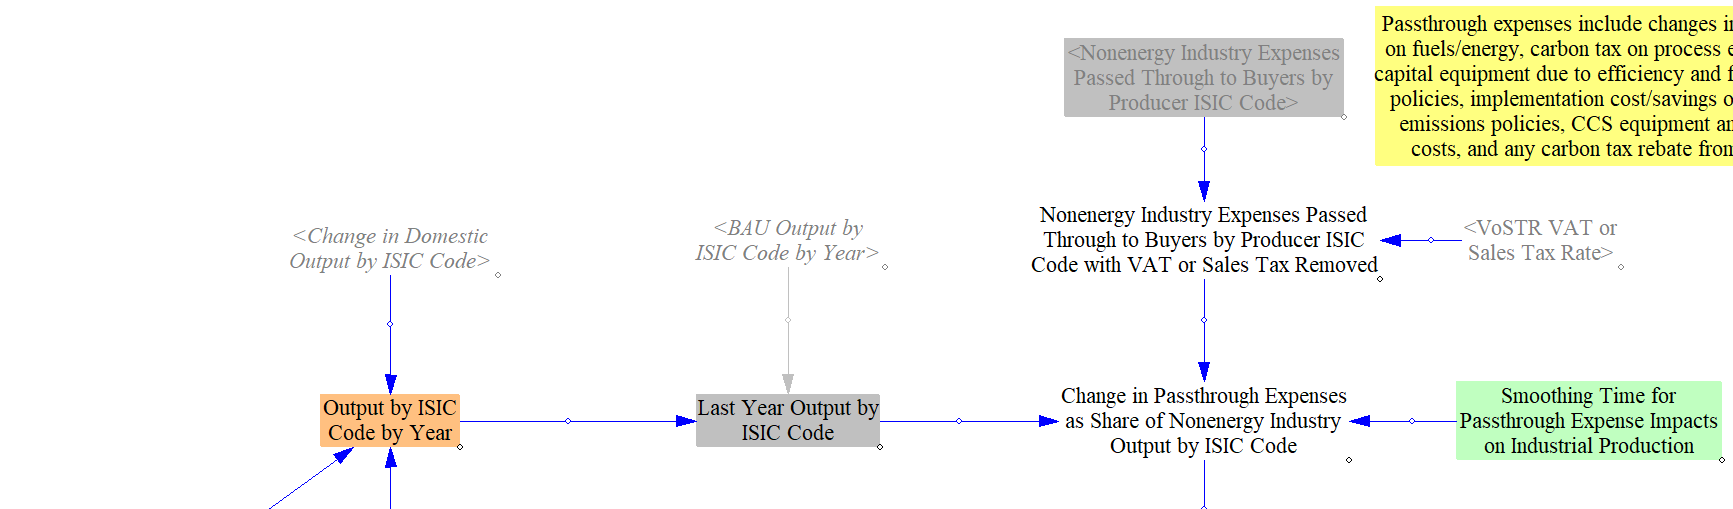 change in passthrough costs as a share of output by ISIC code